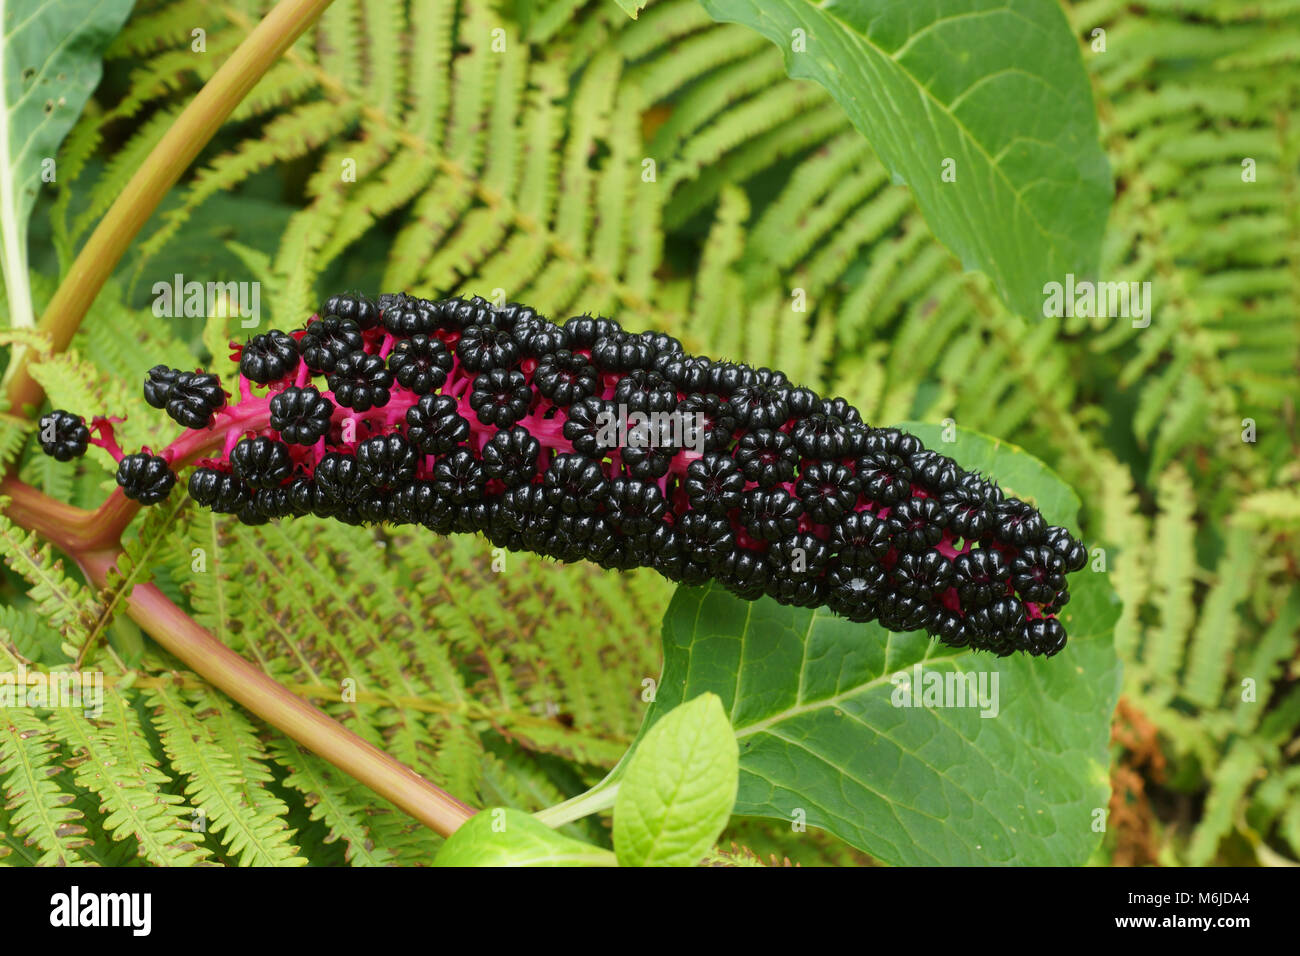 Phytolacca acinosa foliage and fruit. Phytolacca is a genus of perennial plants. Stock Photo